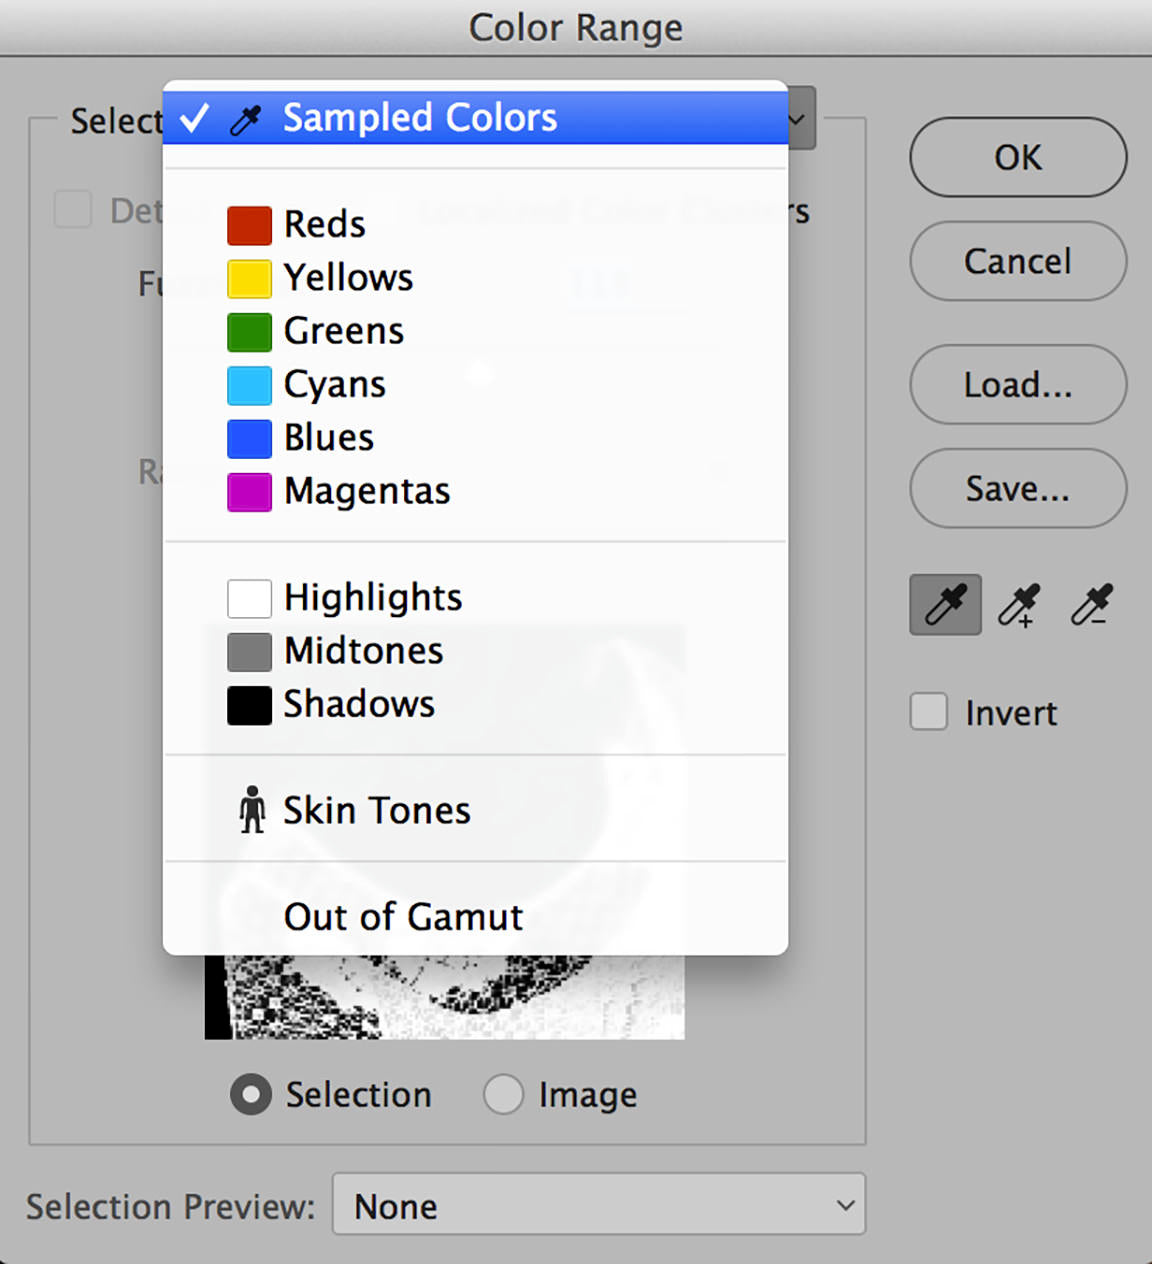 Sample colors in the Color Range tool